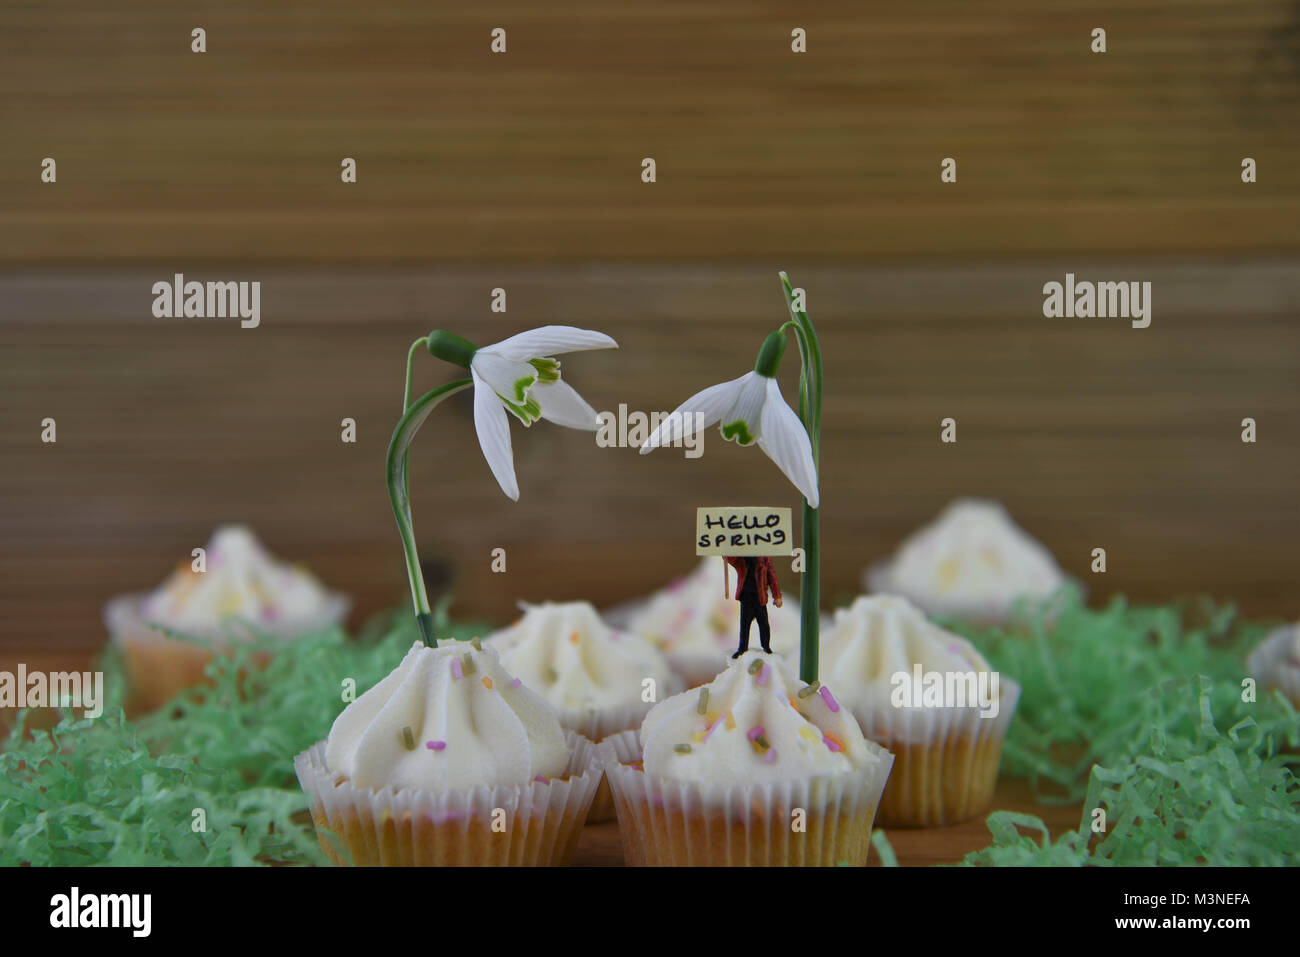 springtime fresh snowdrops on cupcakes with cute miniature person figurine holding a sign for Hello spring Stock Photo